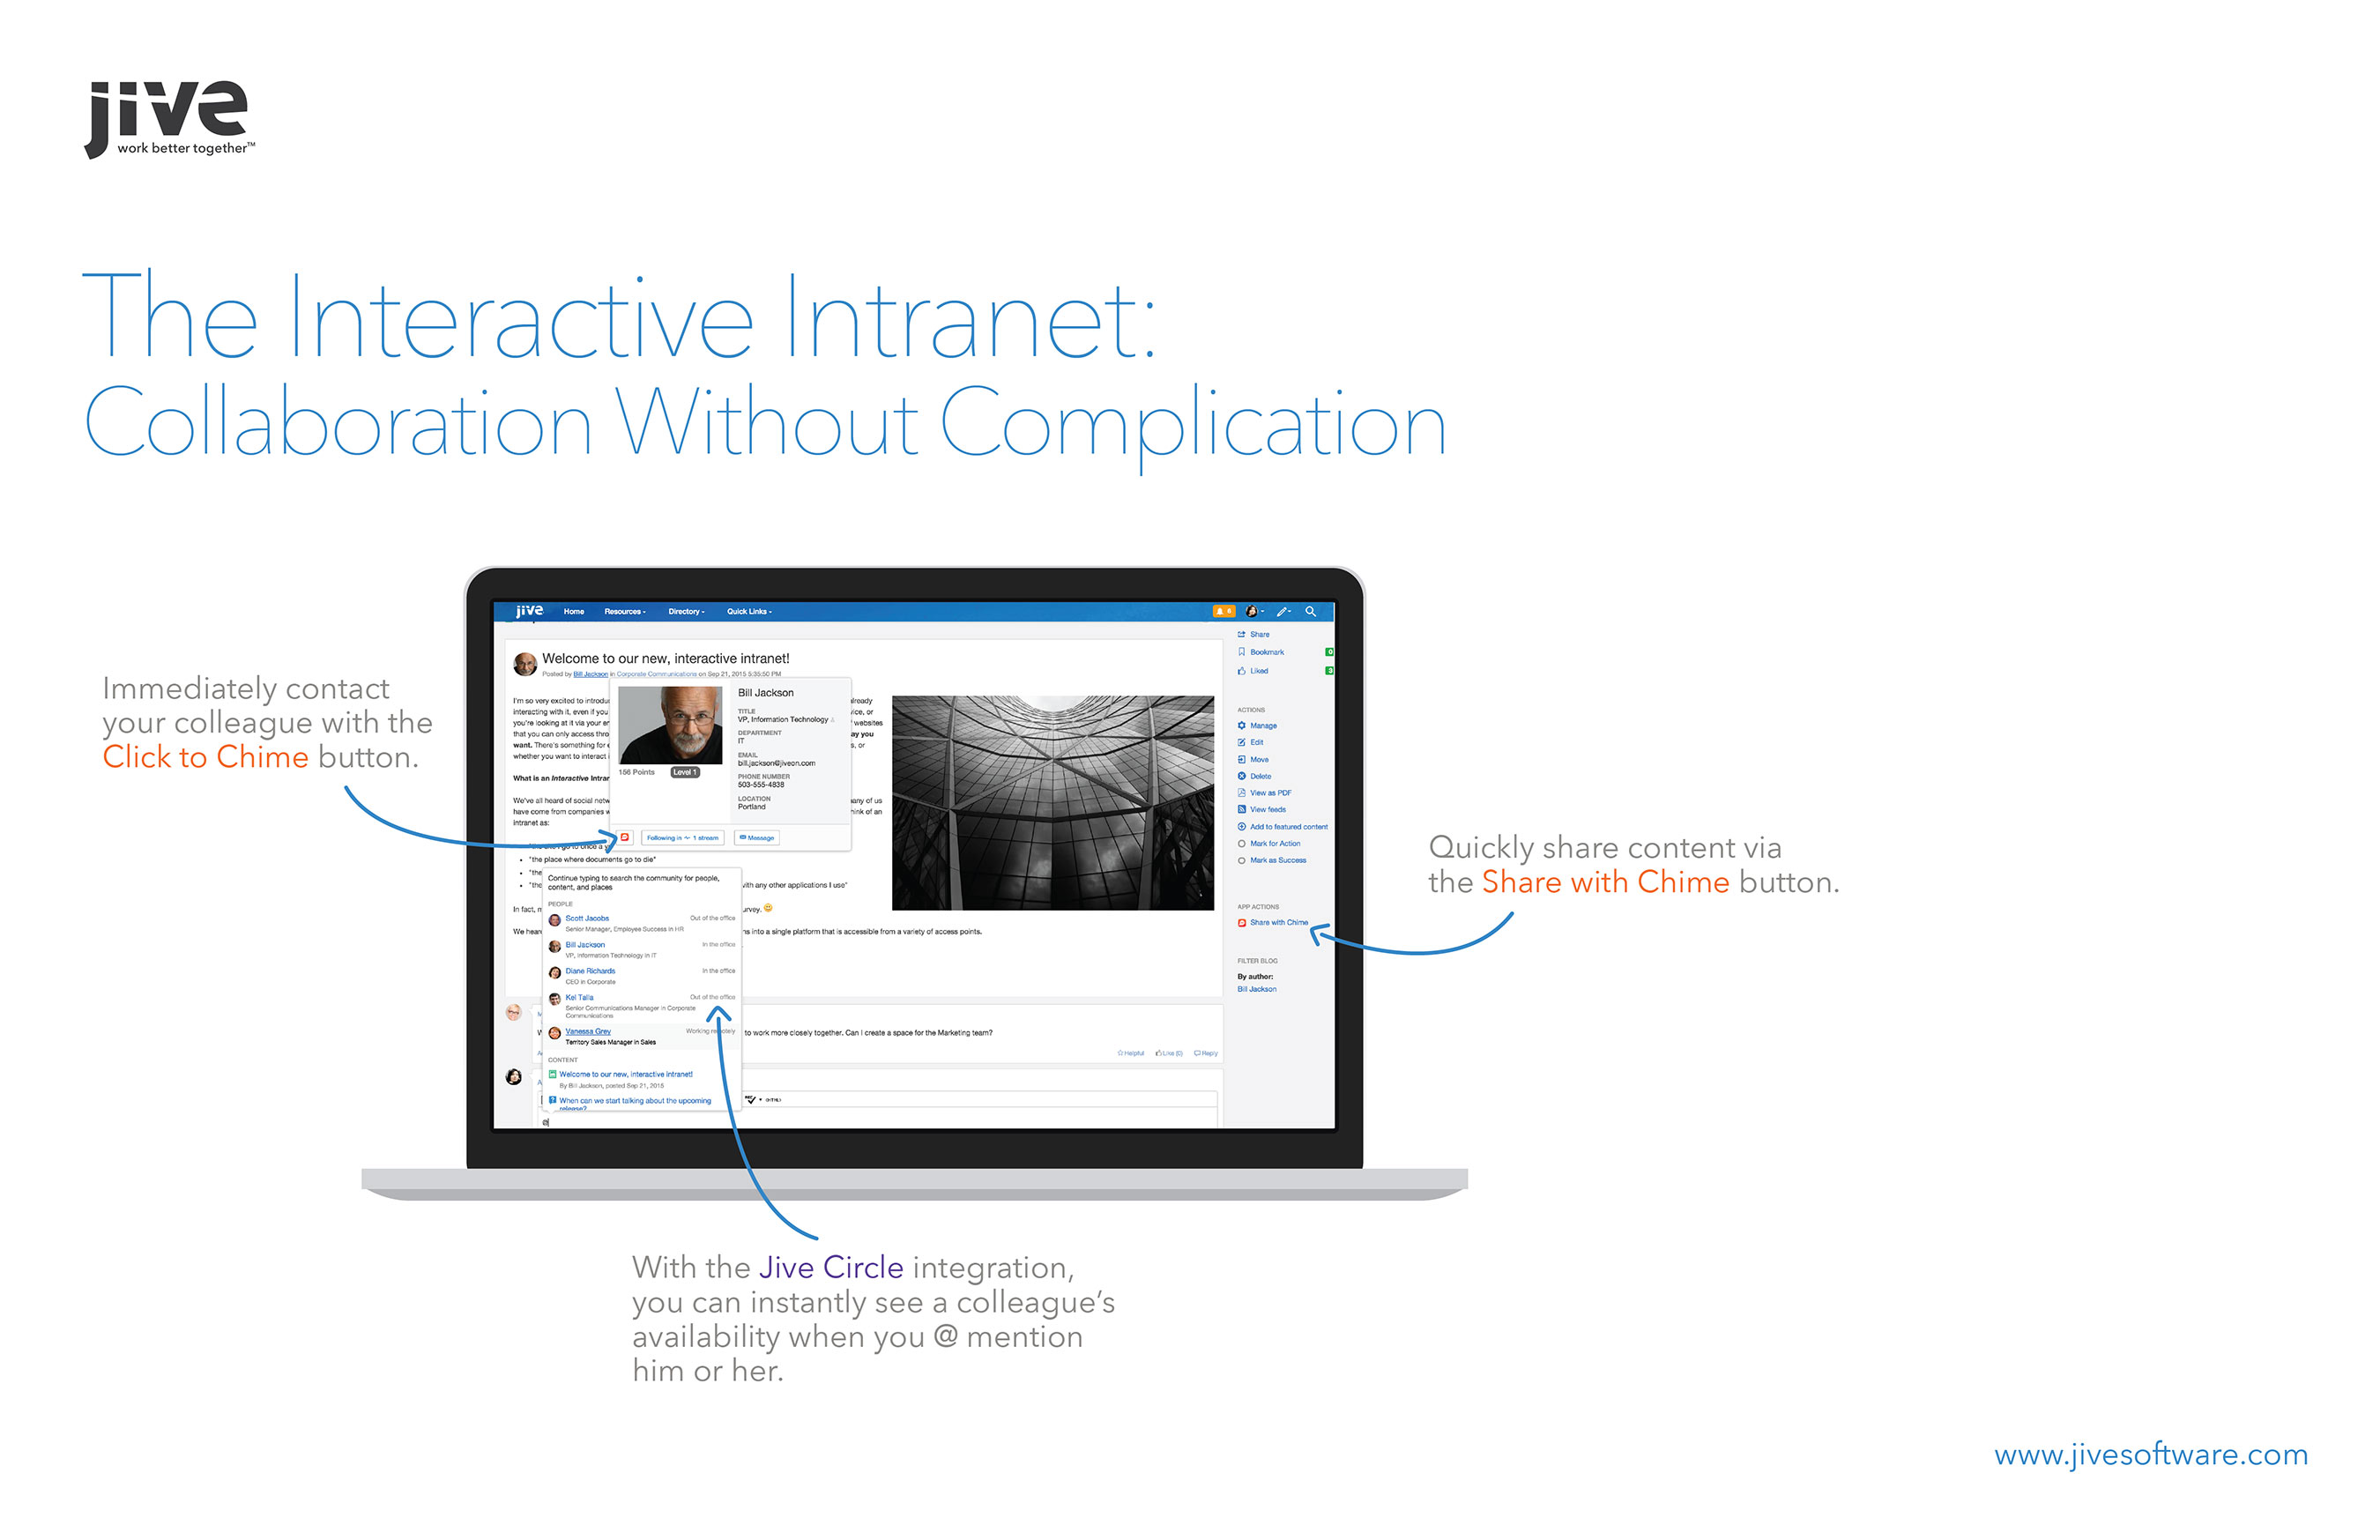 The Interactive Intranet: Collaboration Without Complication